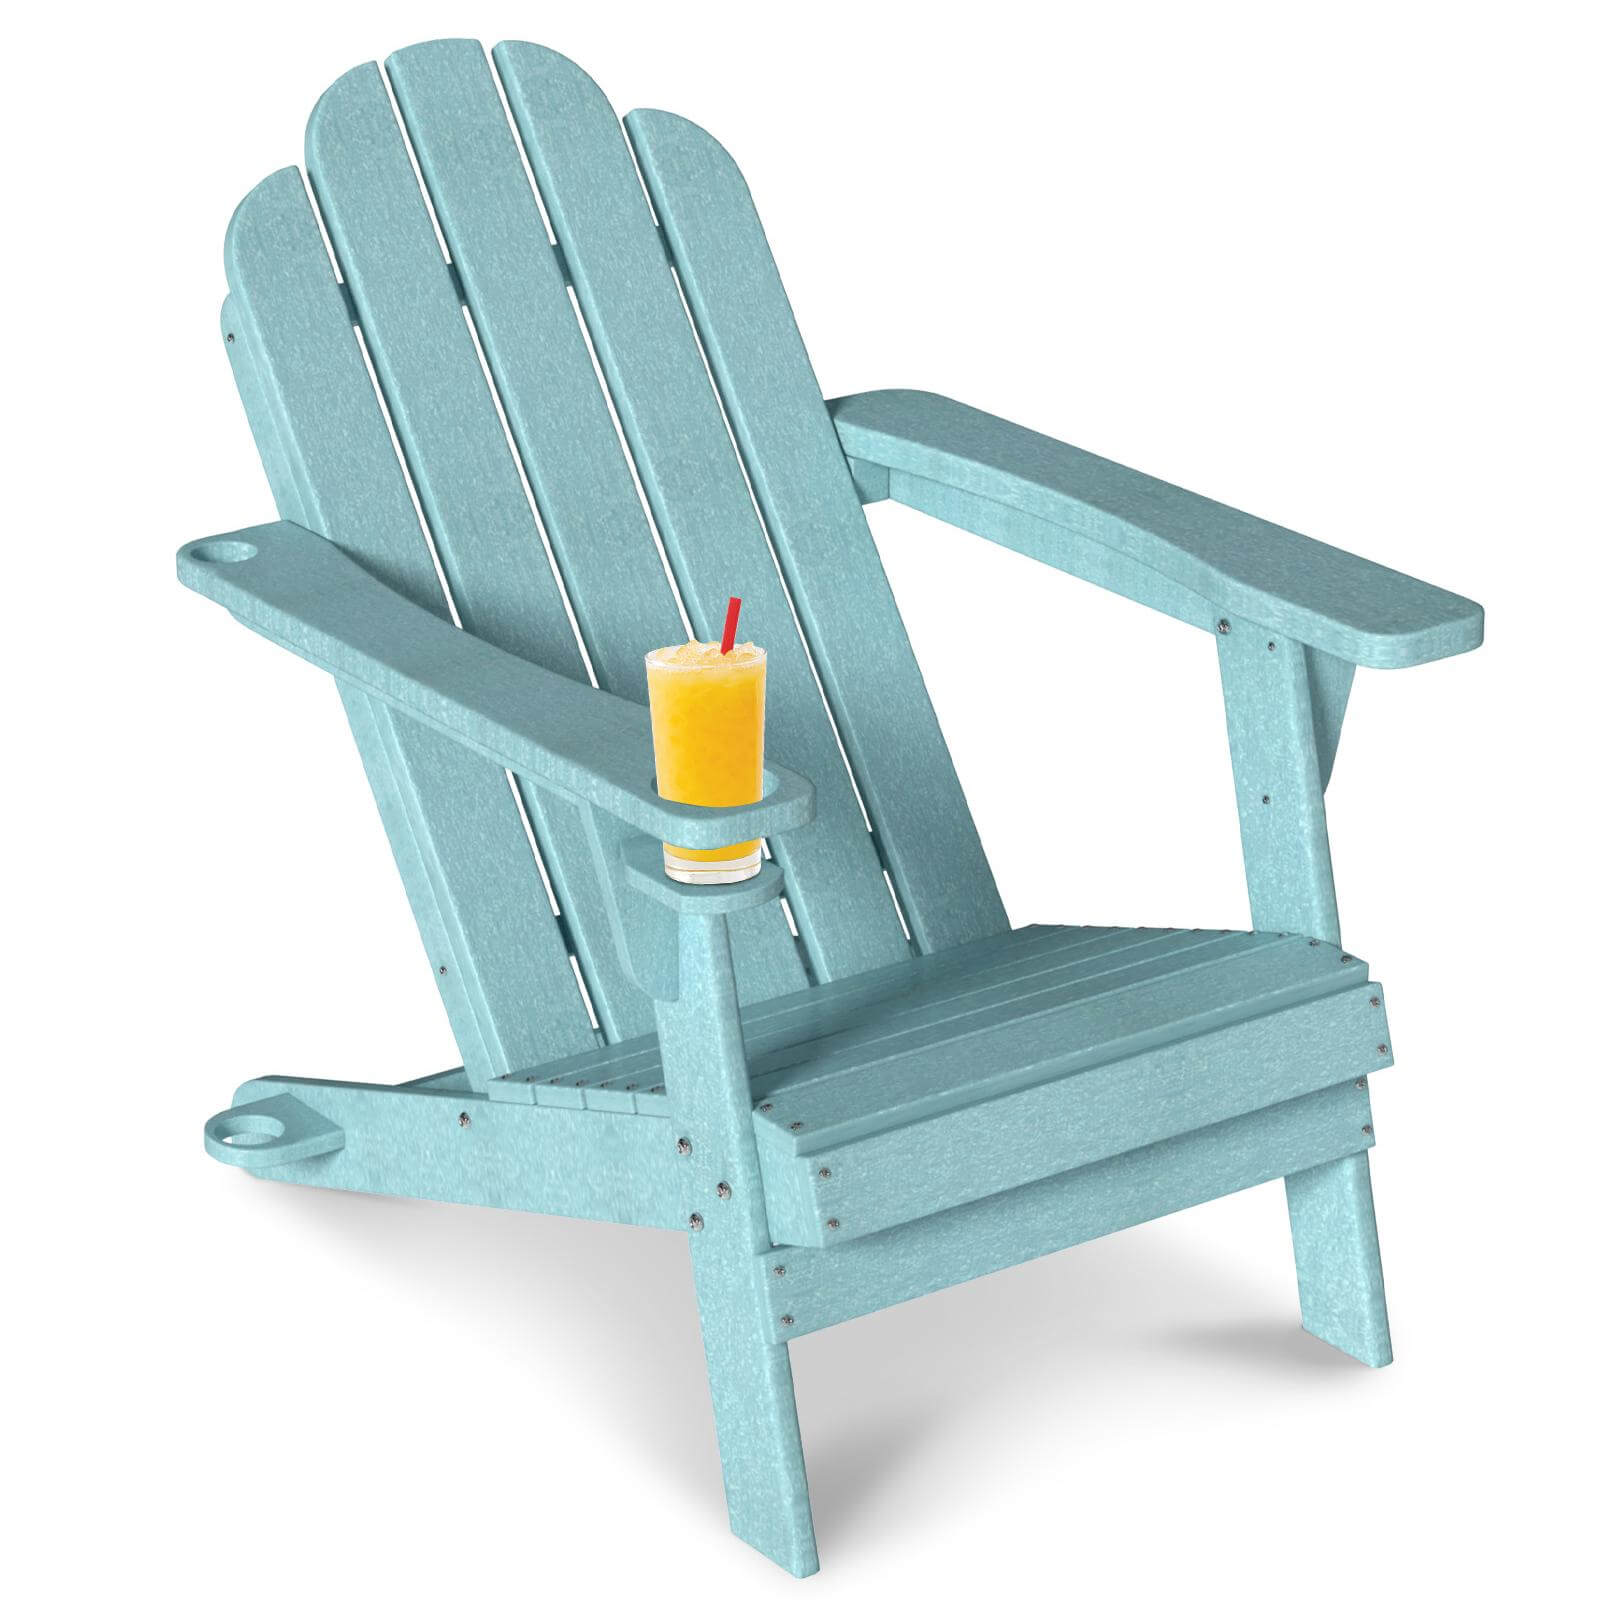 HDPE Traditional Curveback Plastic Patio Adirondack Chair with 3.15 in. Cup Holder and 1.5in. umbrella holder